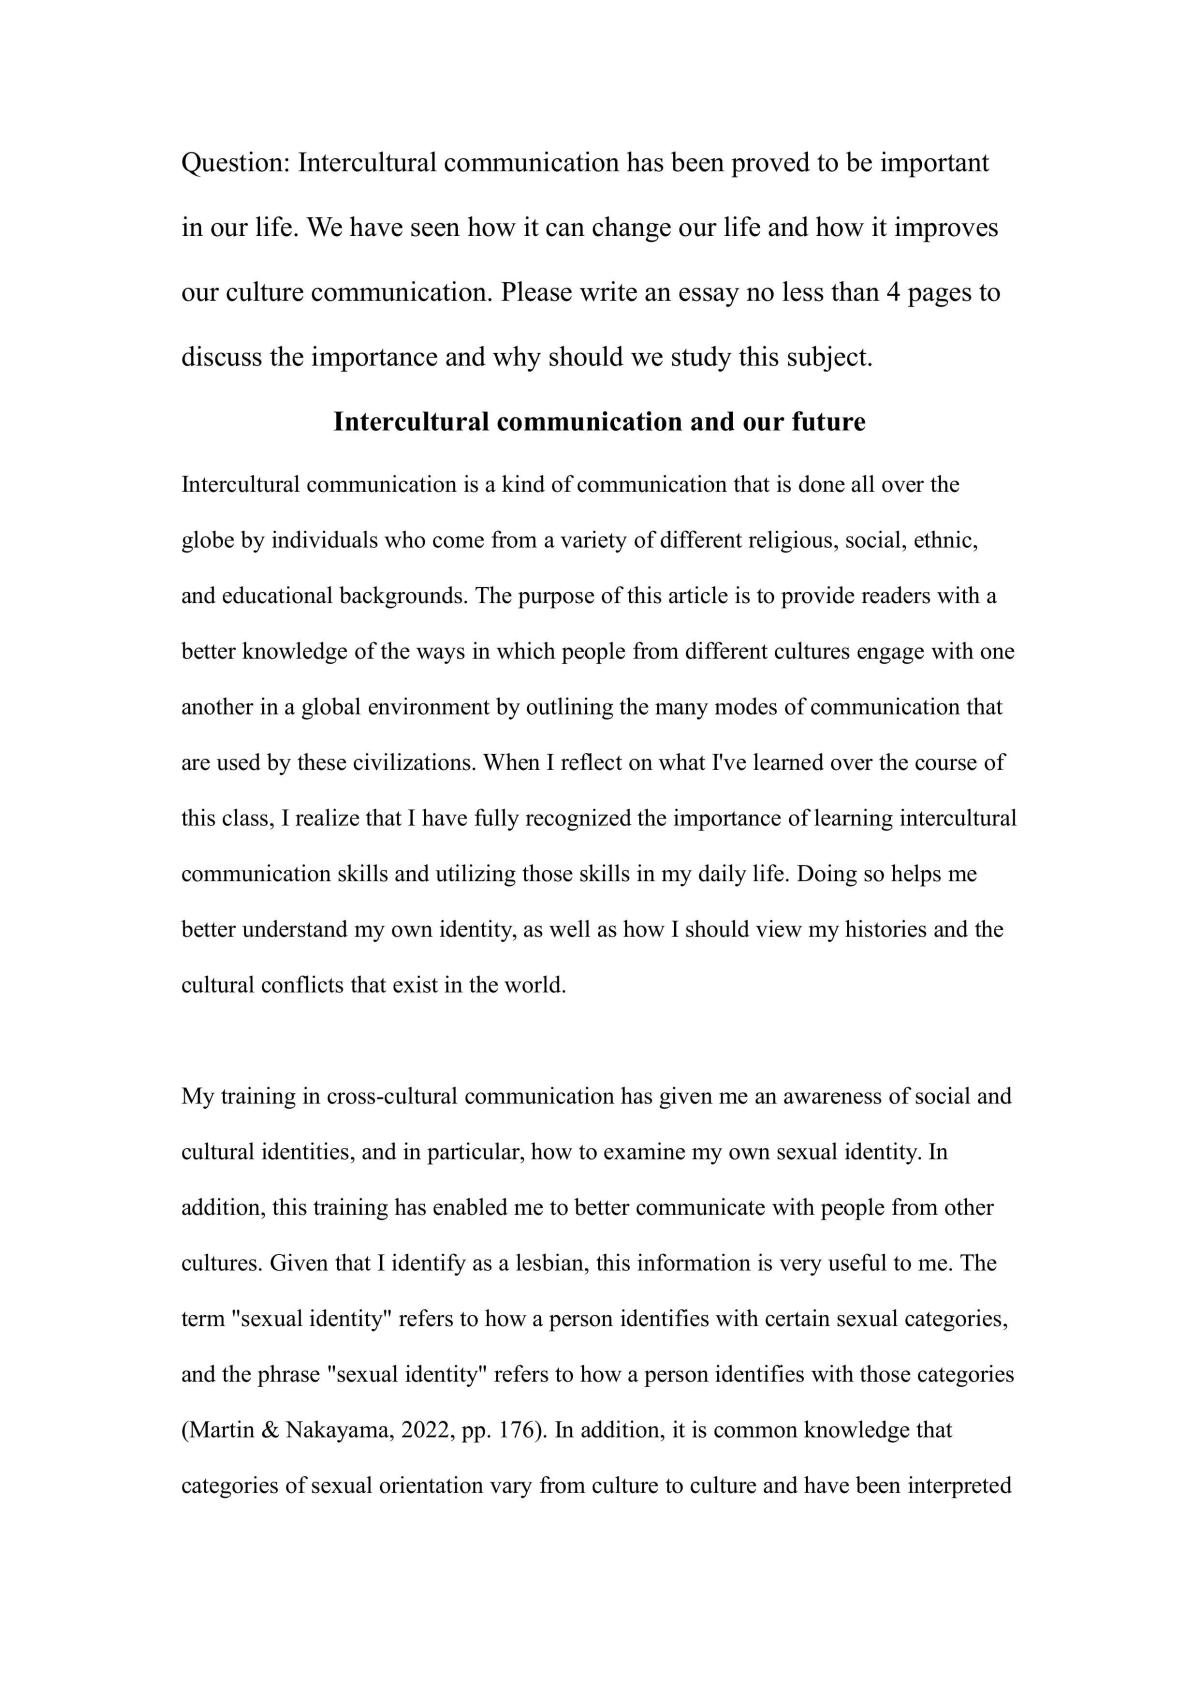 Intercultural communication and our future - Page 1